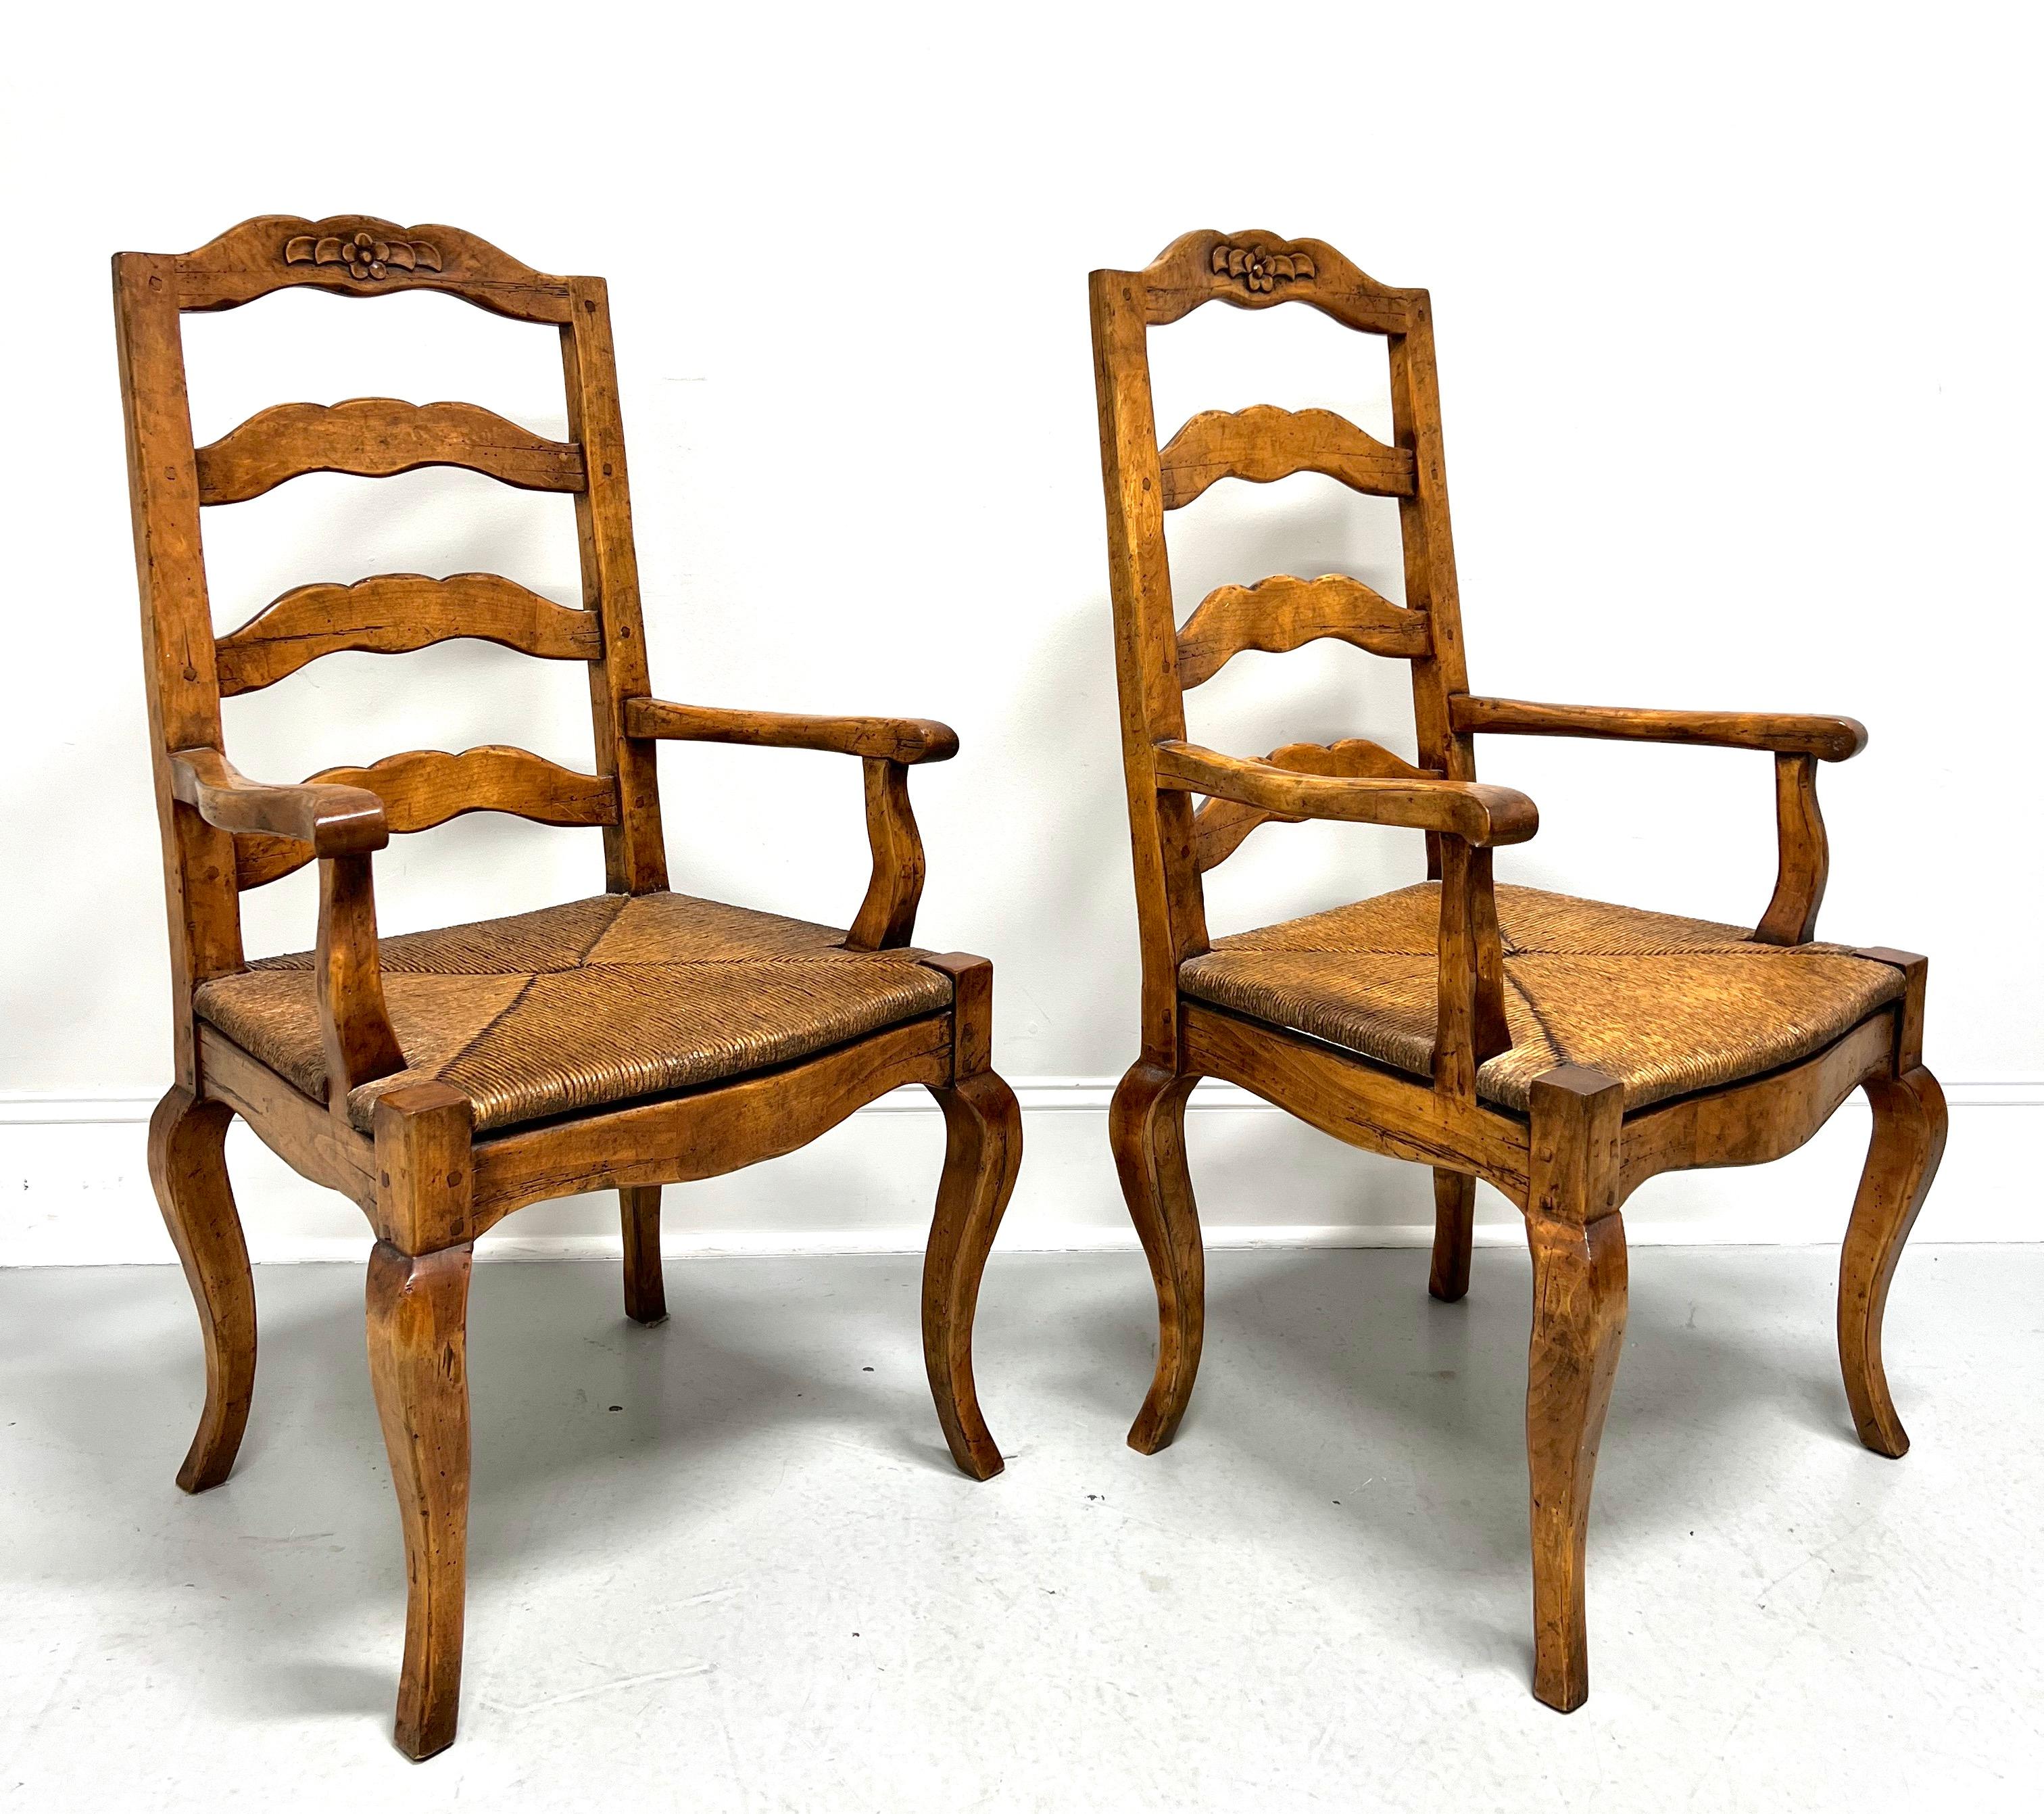 French Provincial Late 20th C. Distressed French Country Dining Armchairs w/ Rush Seats - Pair For Sale